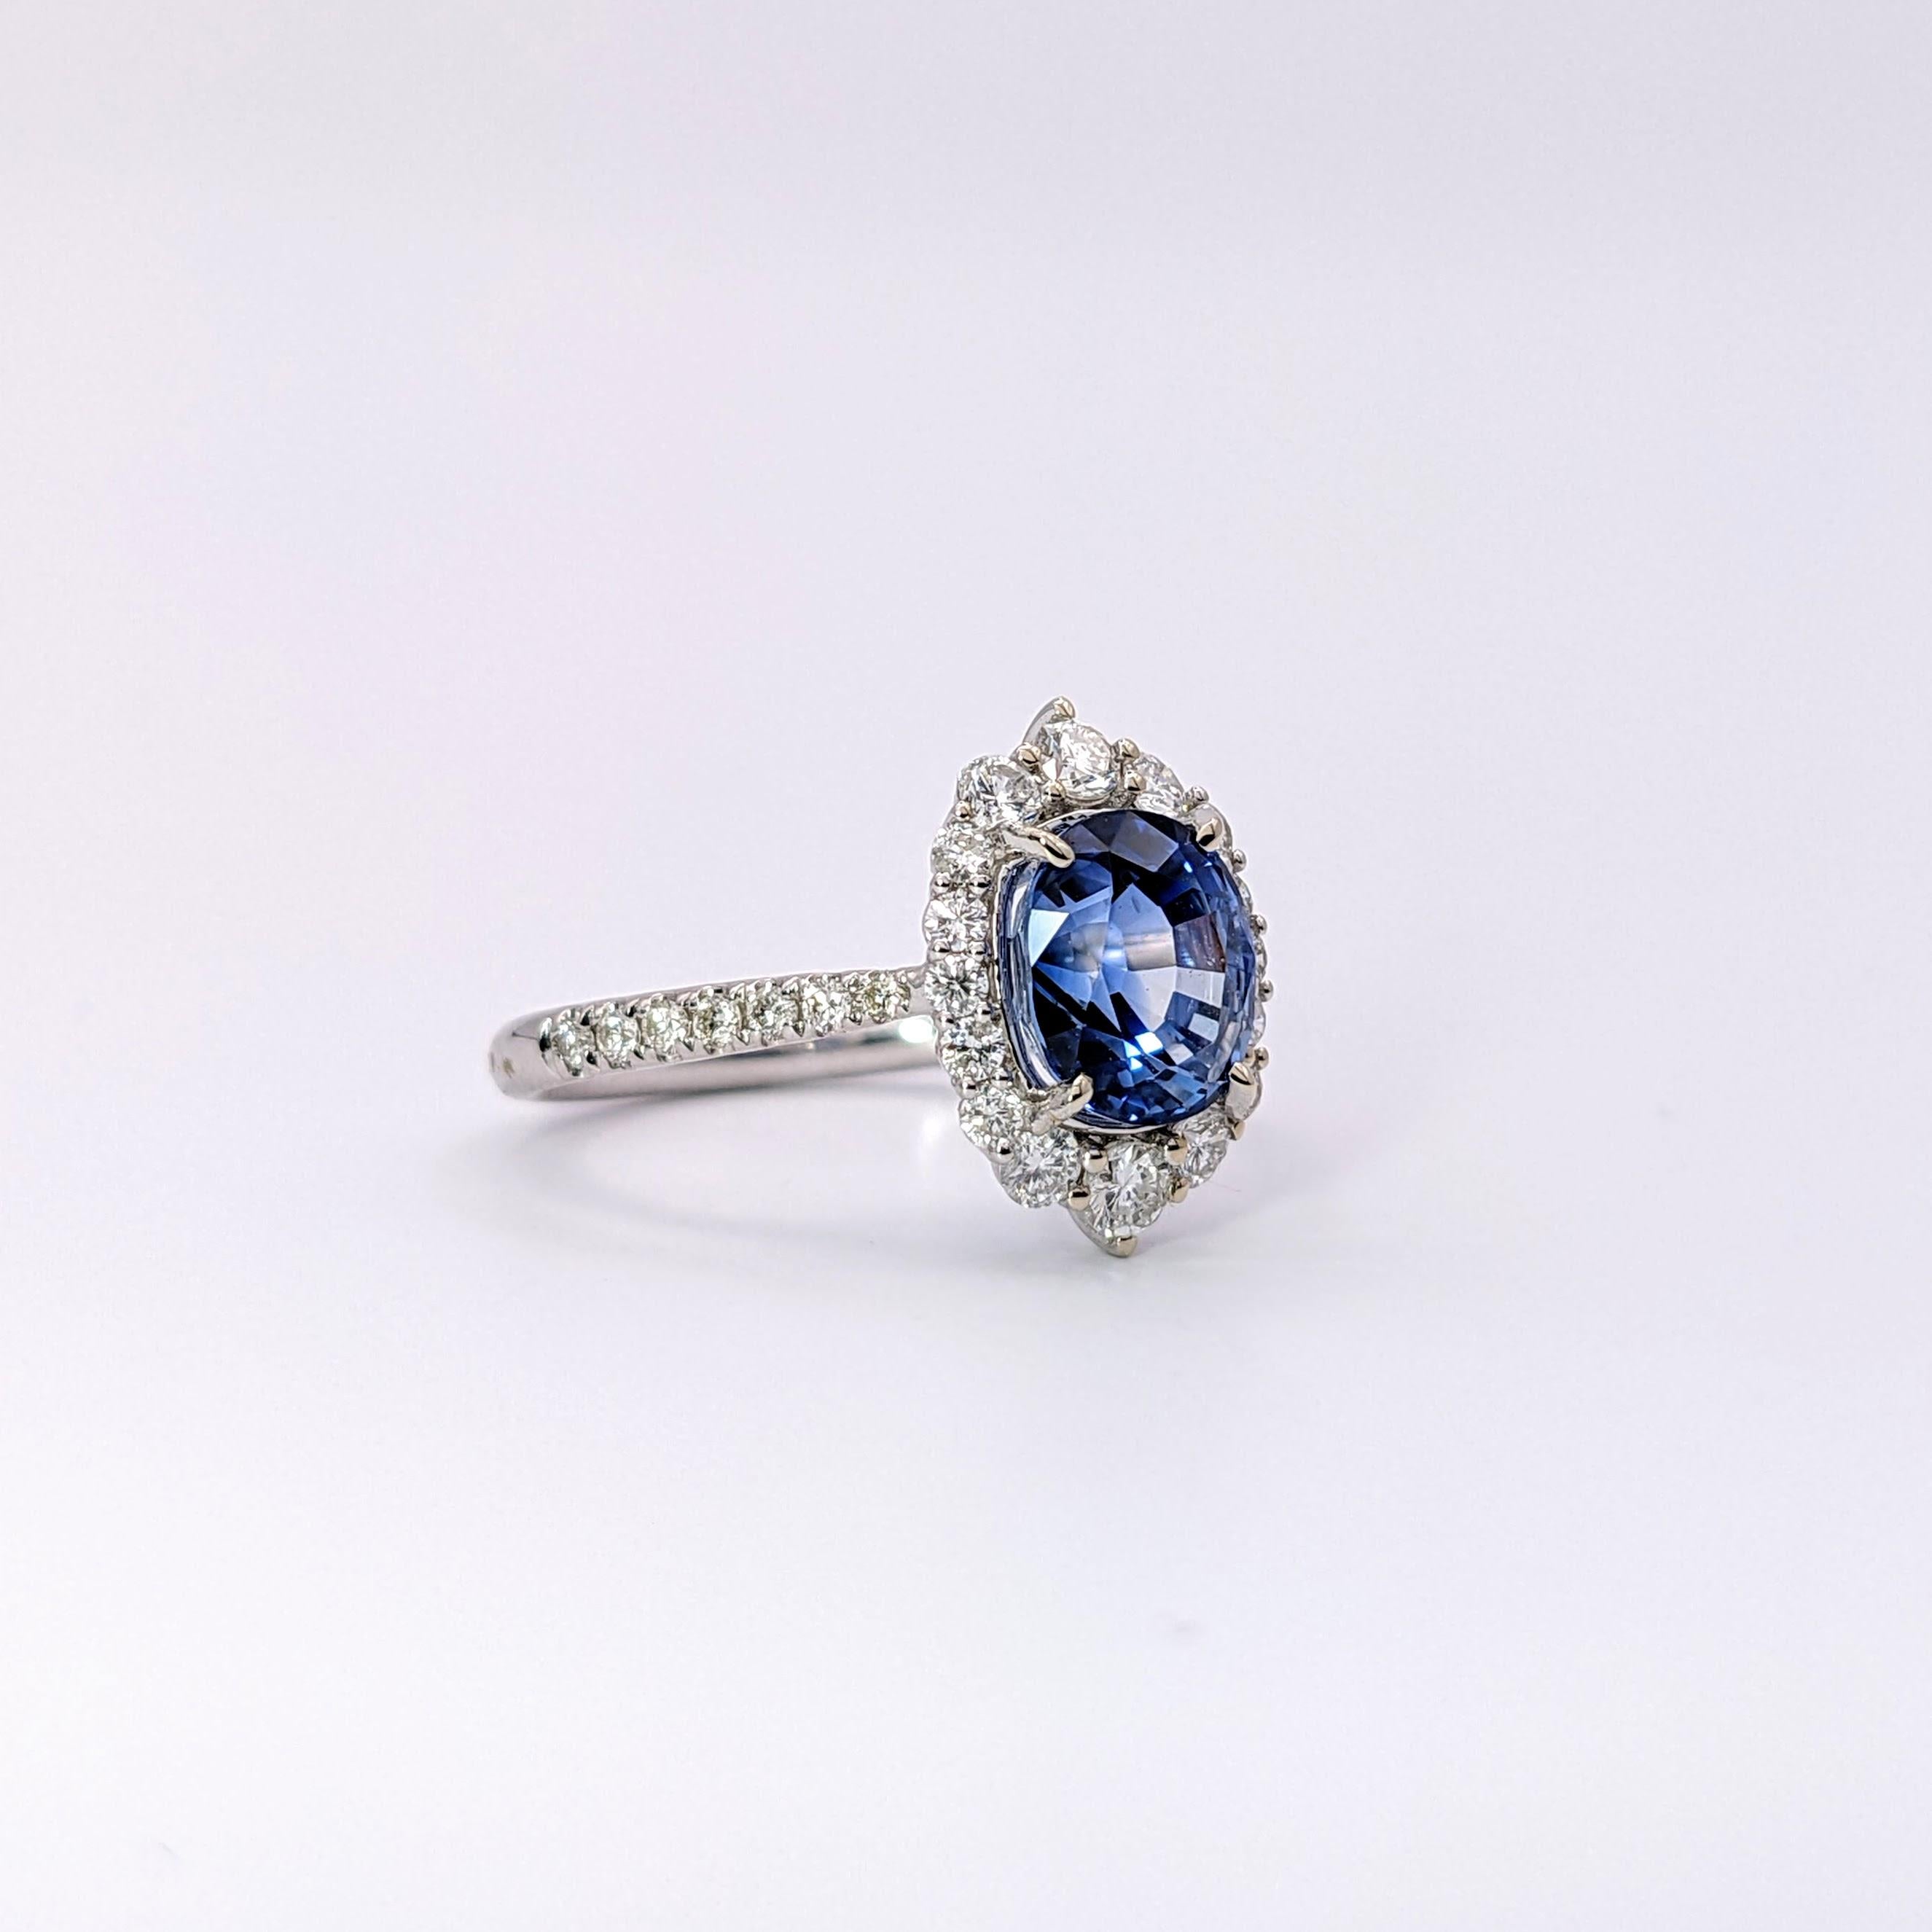 This lovely blue sapphire from Ceylon makes a beautiful ring in this setting of 14k solid white gold. A collection of different sized natural earth-mined round diamond accents make a sparkling oval-shaped halo and a pavé shank. The sapphire is said